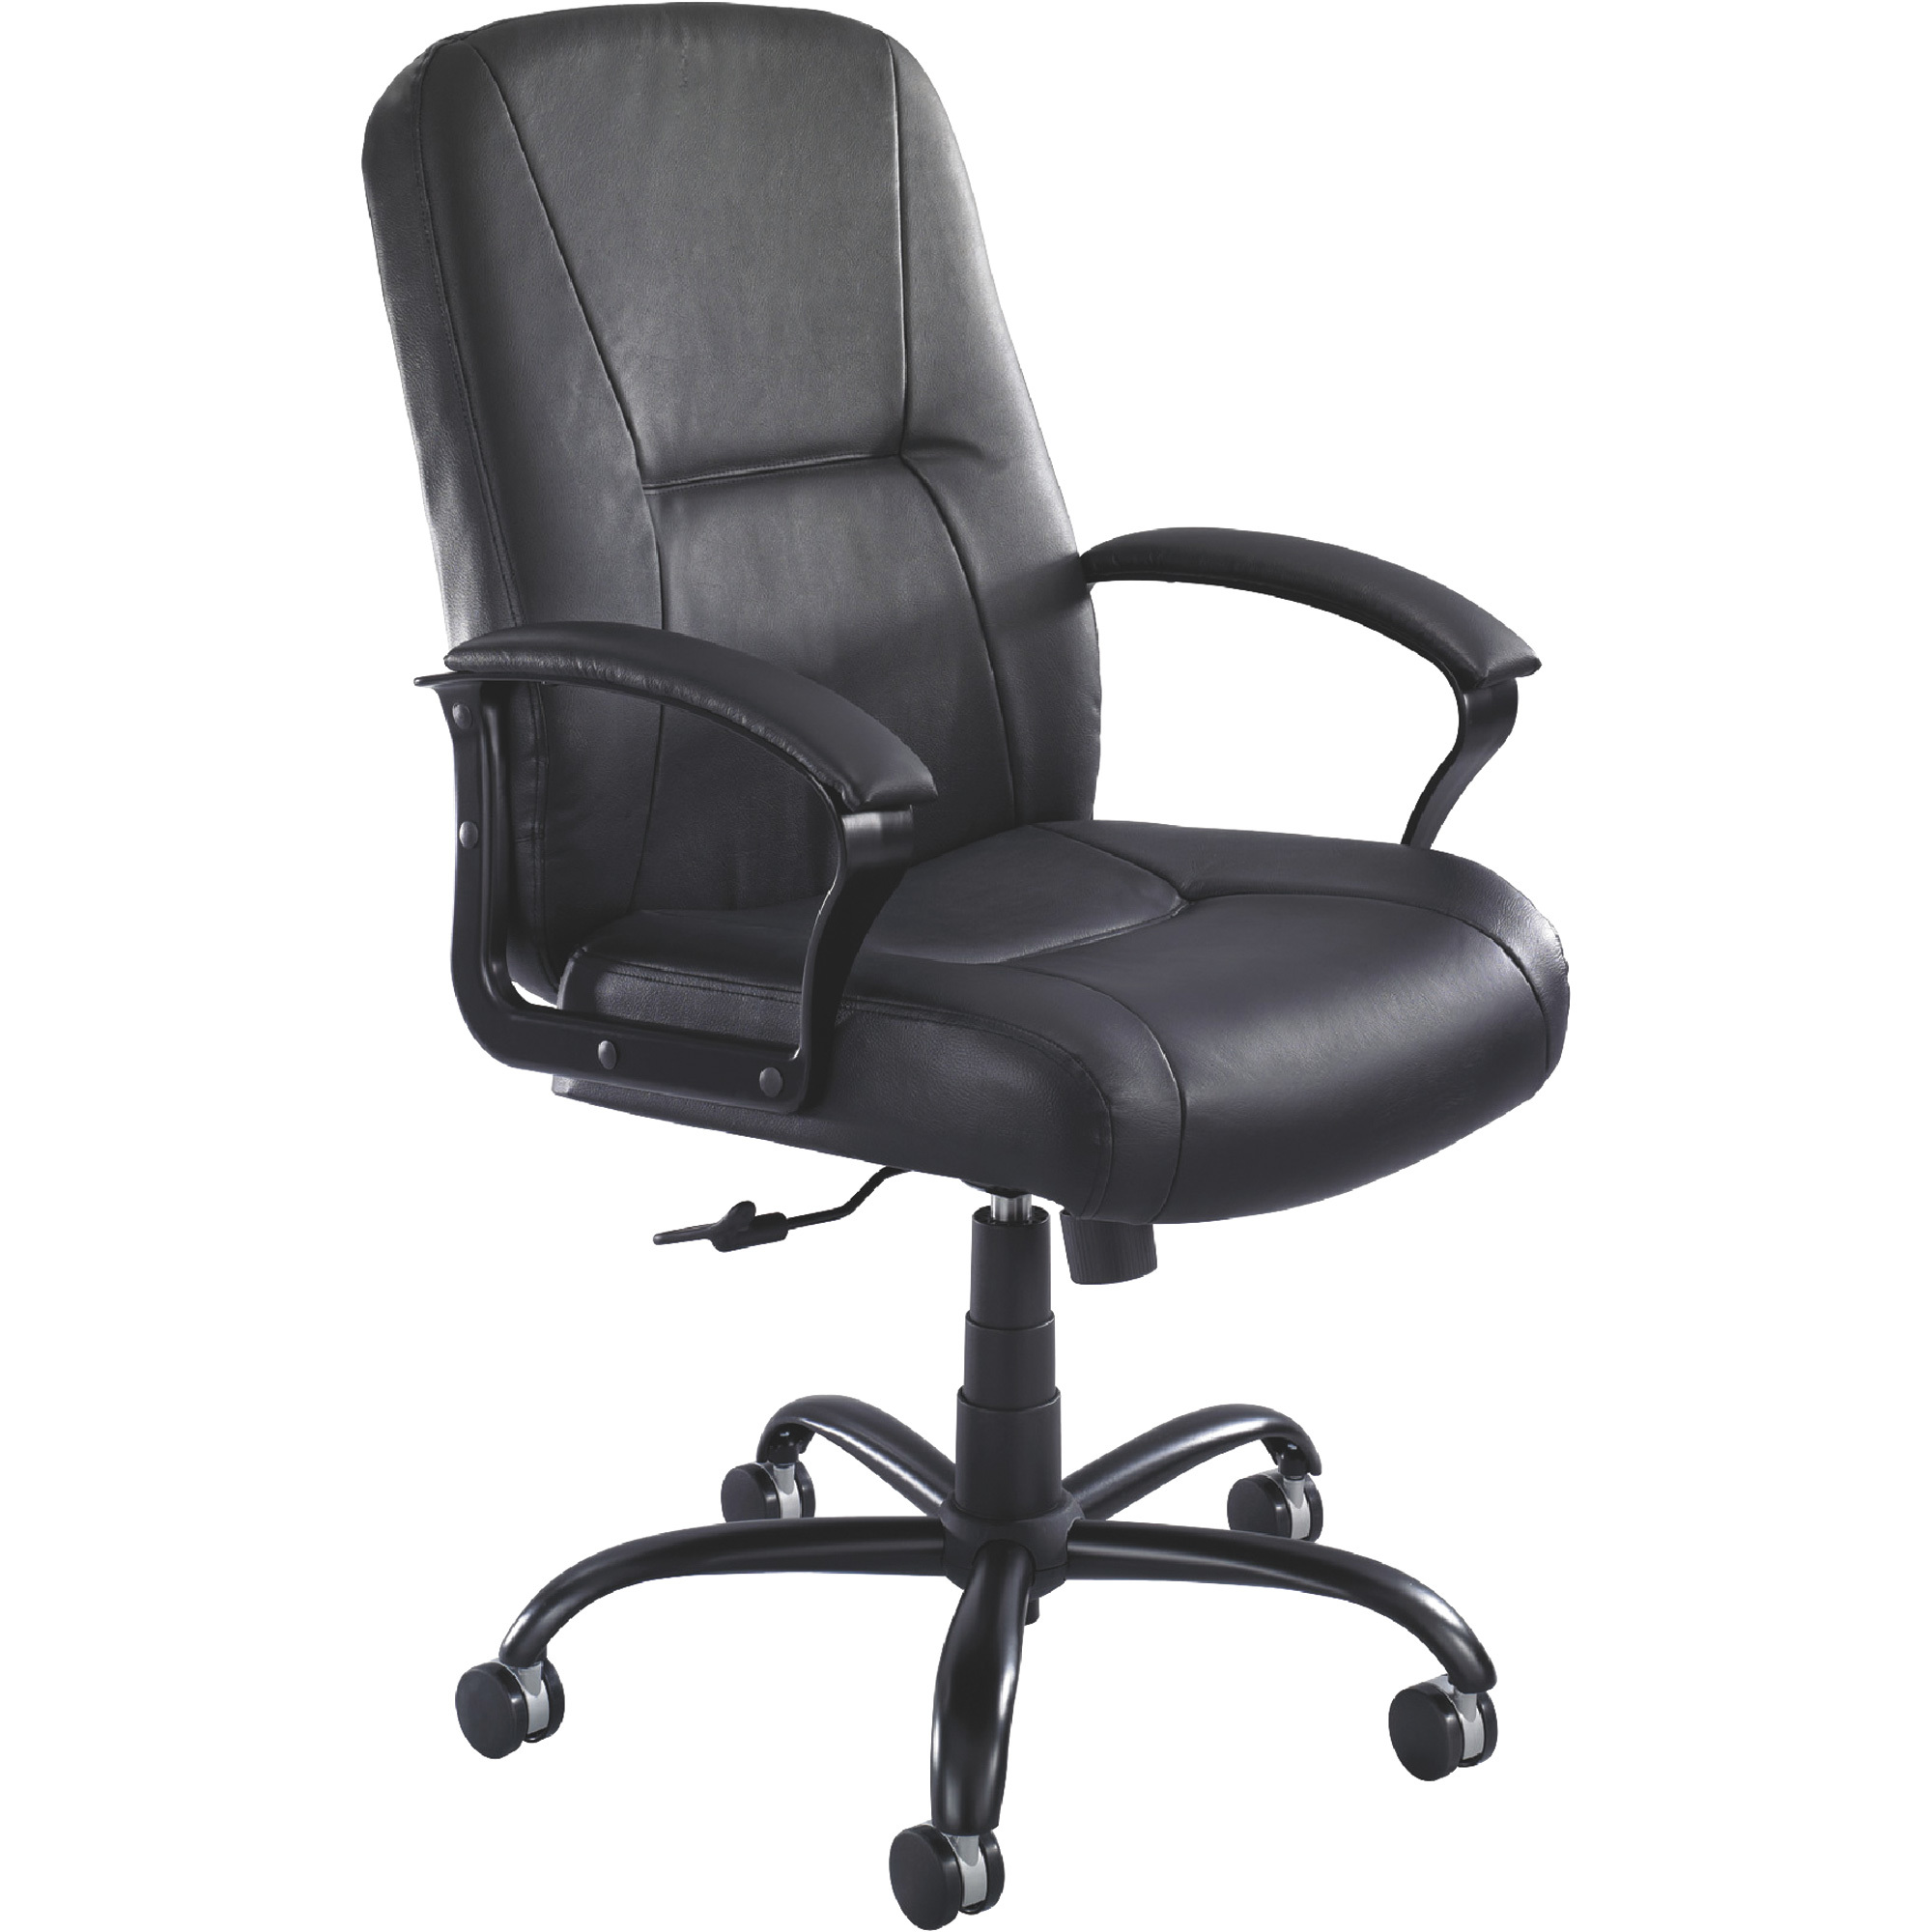 Serenity Big & Tall Leather Highback Office Chair, Model - Safco 3500BL